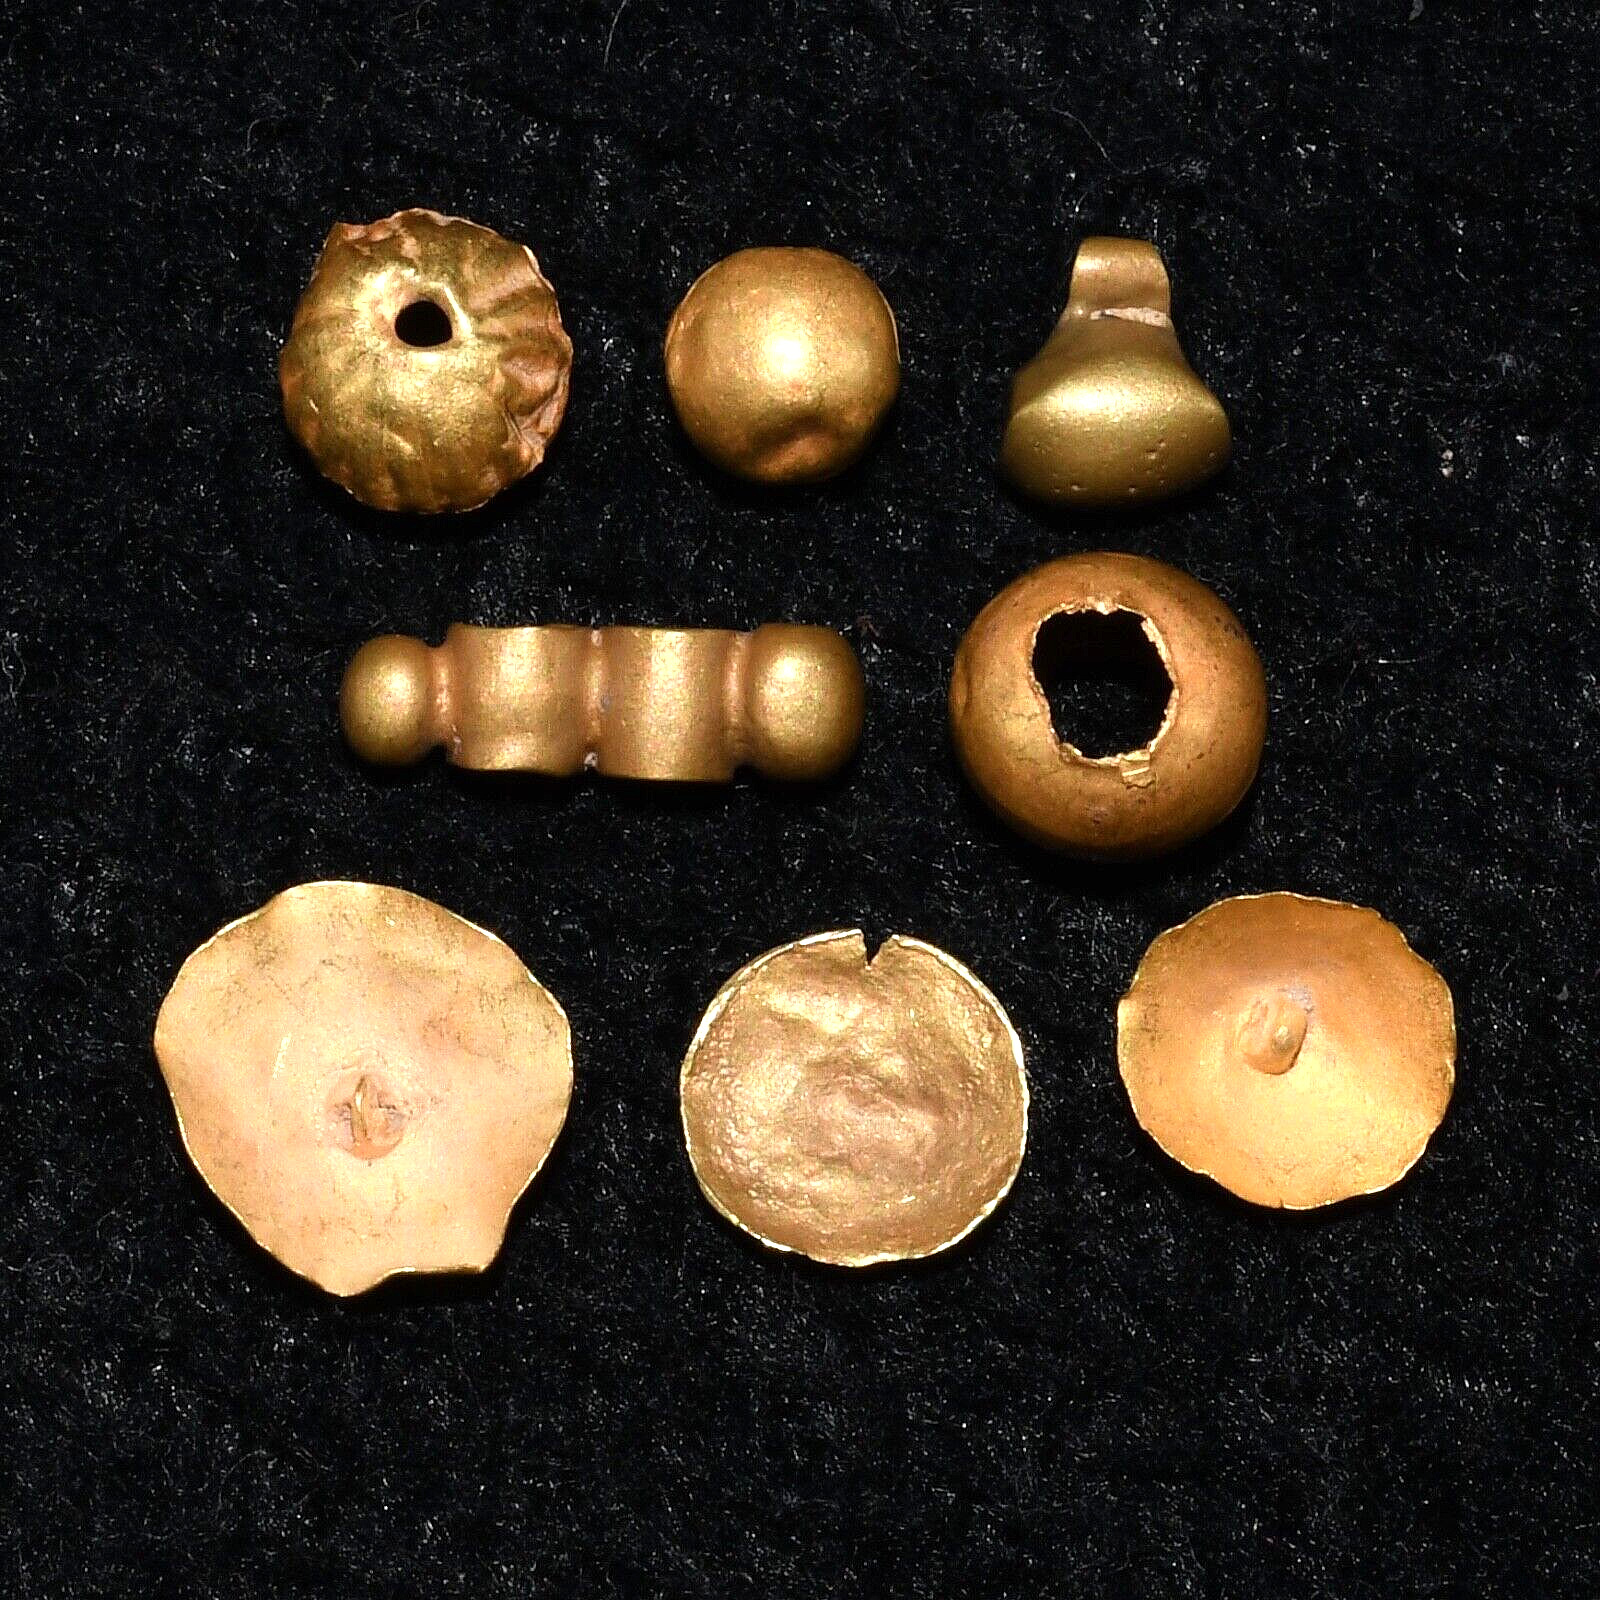 8 Ancient Greek Bactrian Roman Solid Gold Beads Ornaments 300 BCE-1st Century AD